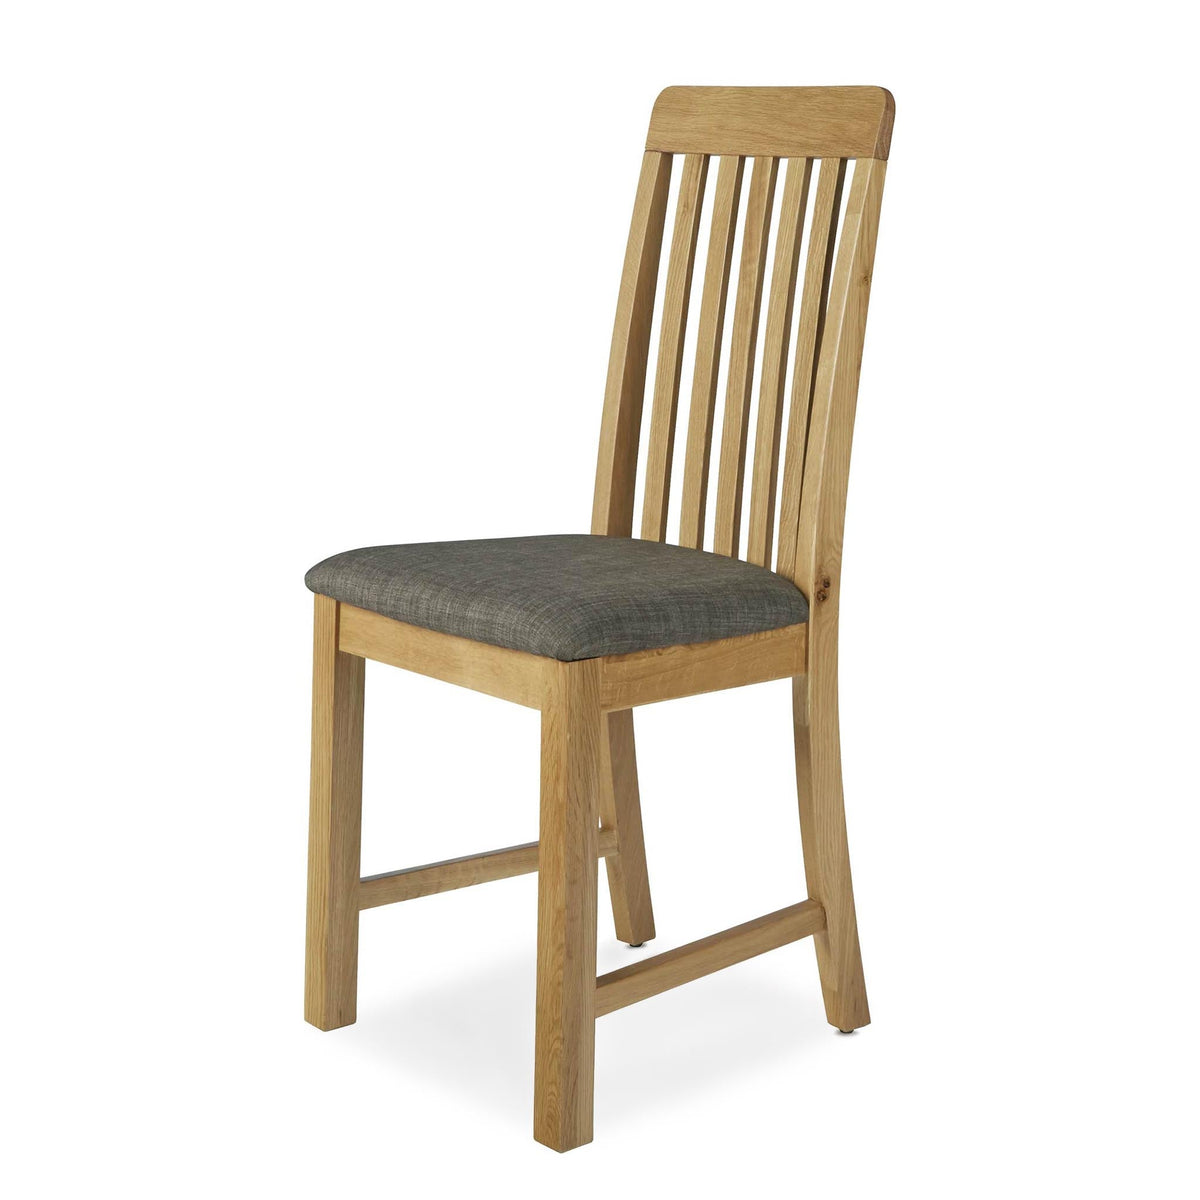 Alba Oak Slatted Dining Chair - Angled view